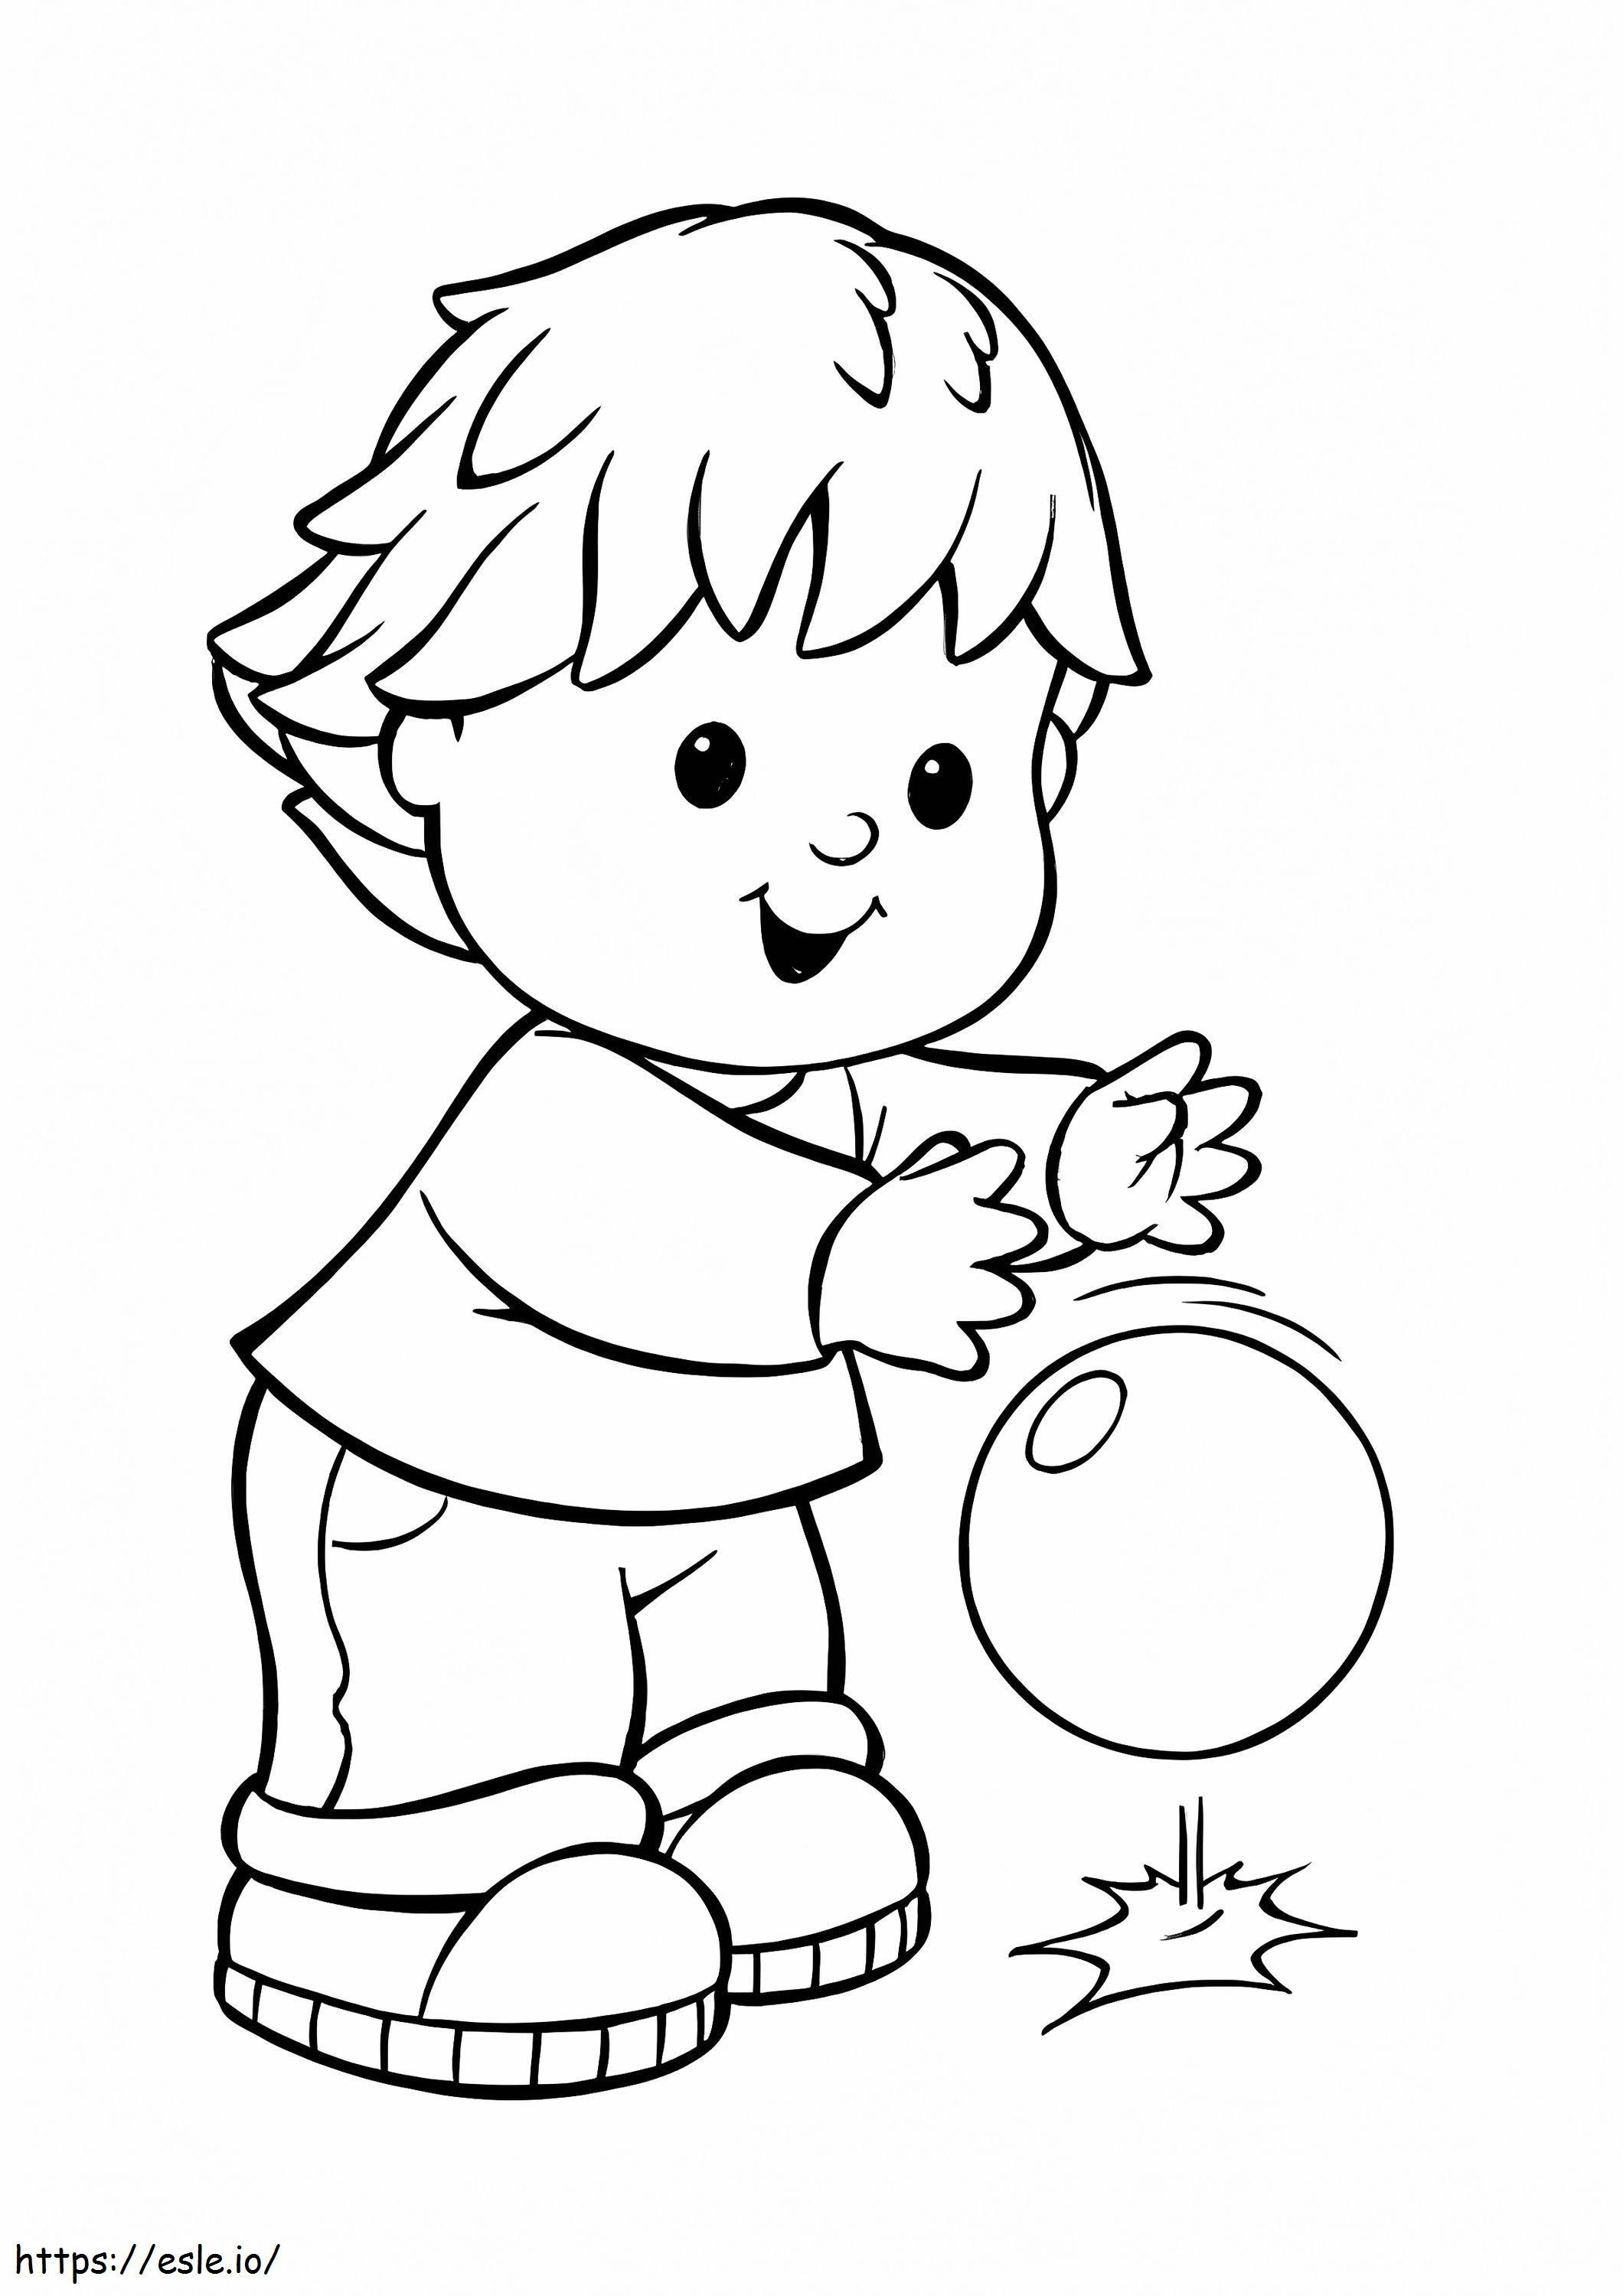 1559978704 Child Playing Football A4 coloring page